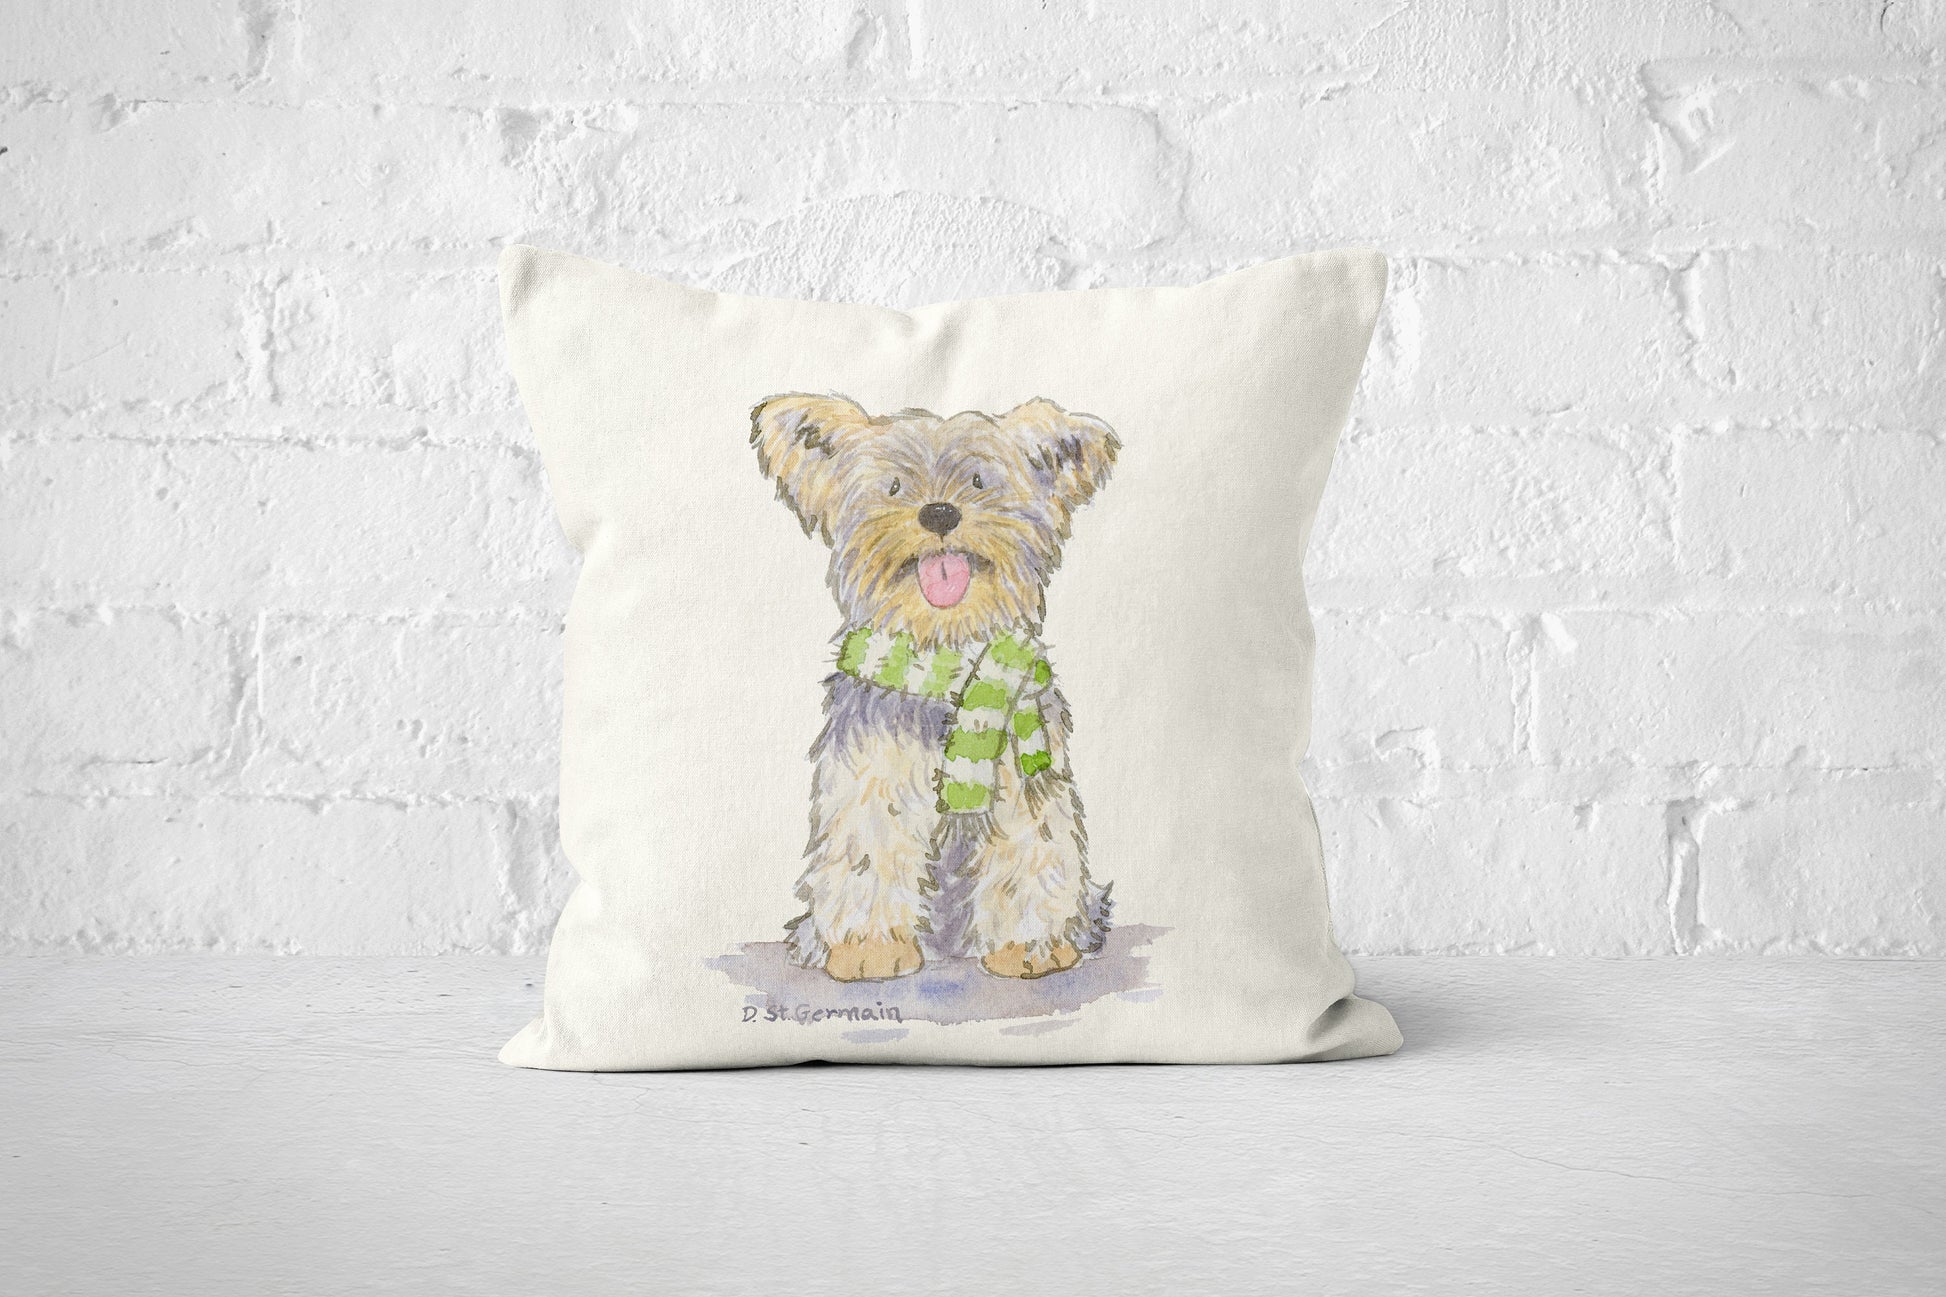 Yorkie Holiday Pillow Cover, Yorkie Gift, Yorkshire Terrier Pillow Cover, Yorkie Lover, Yorkie Gift, Dog Lover Gift, Christmas Throw Pillow